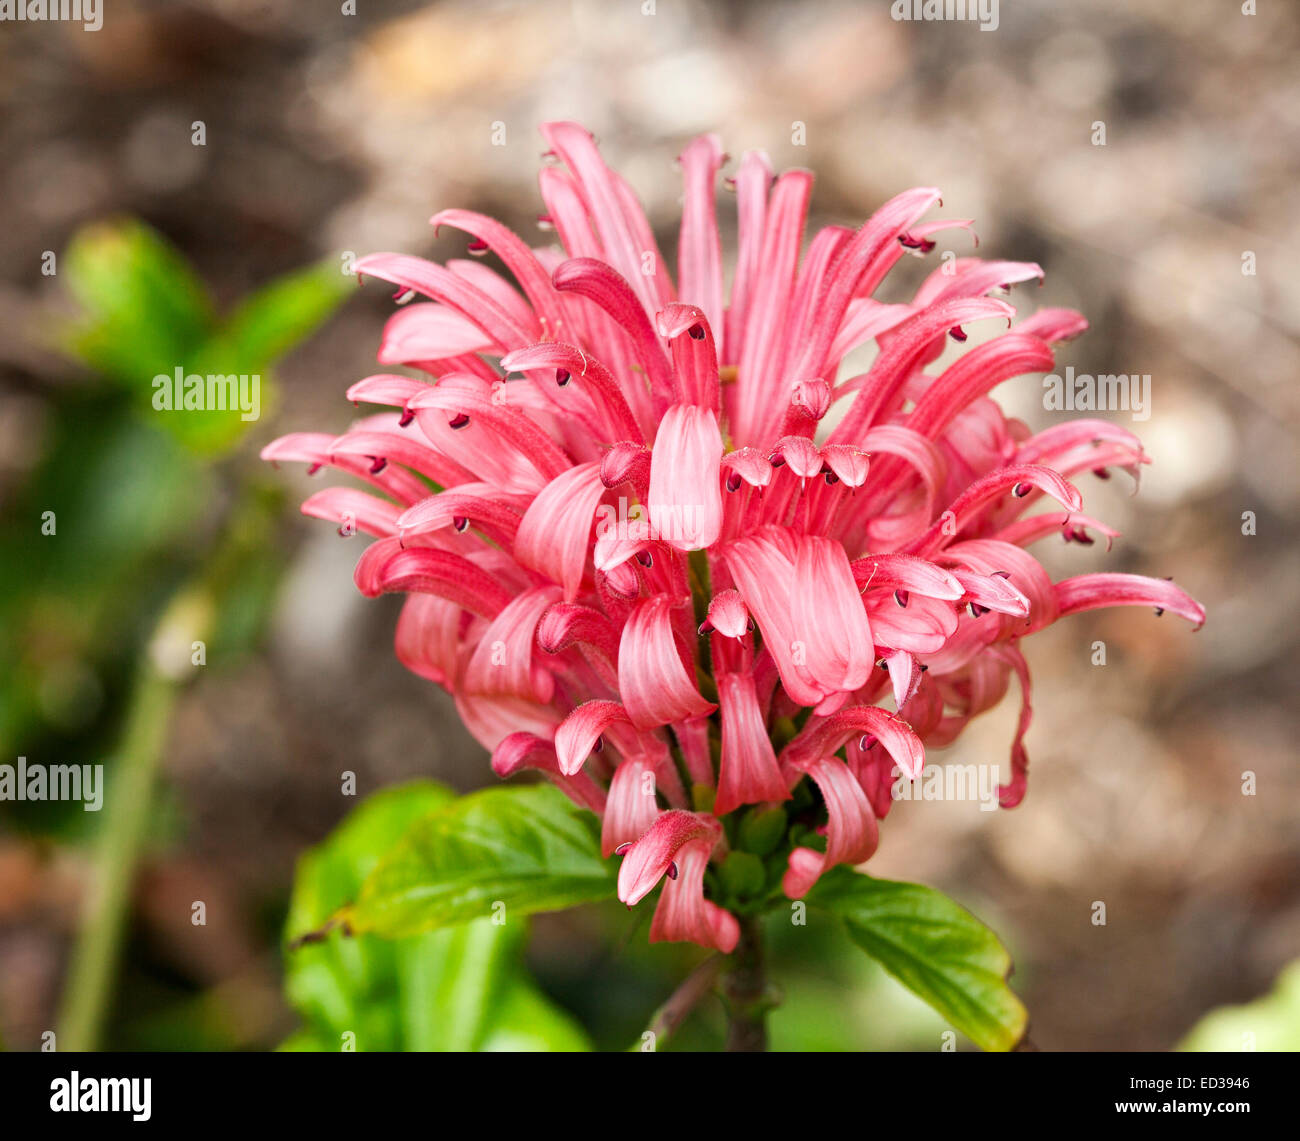 Large cluster of vivid pink flowers of Justicia carnea, Brazilian plume flower, with emerald leaves, on light brown background Stock Photo